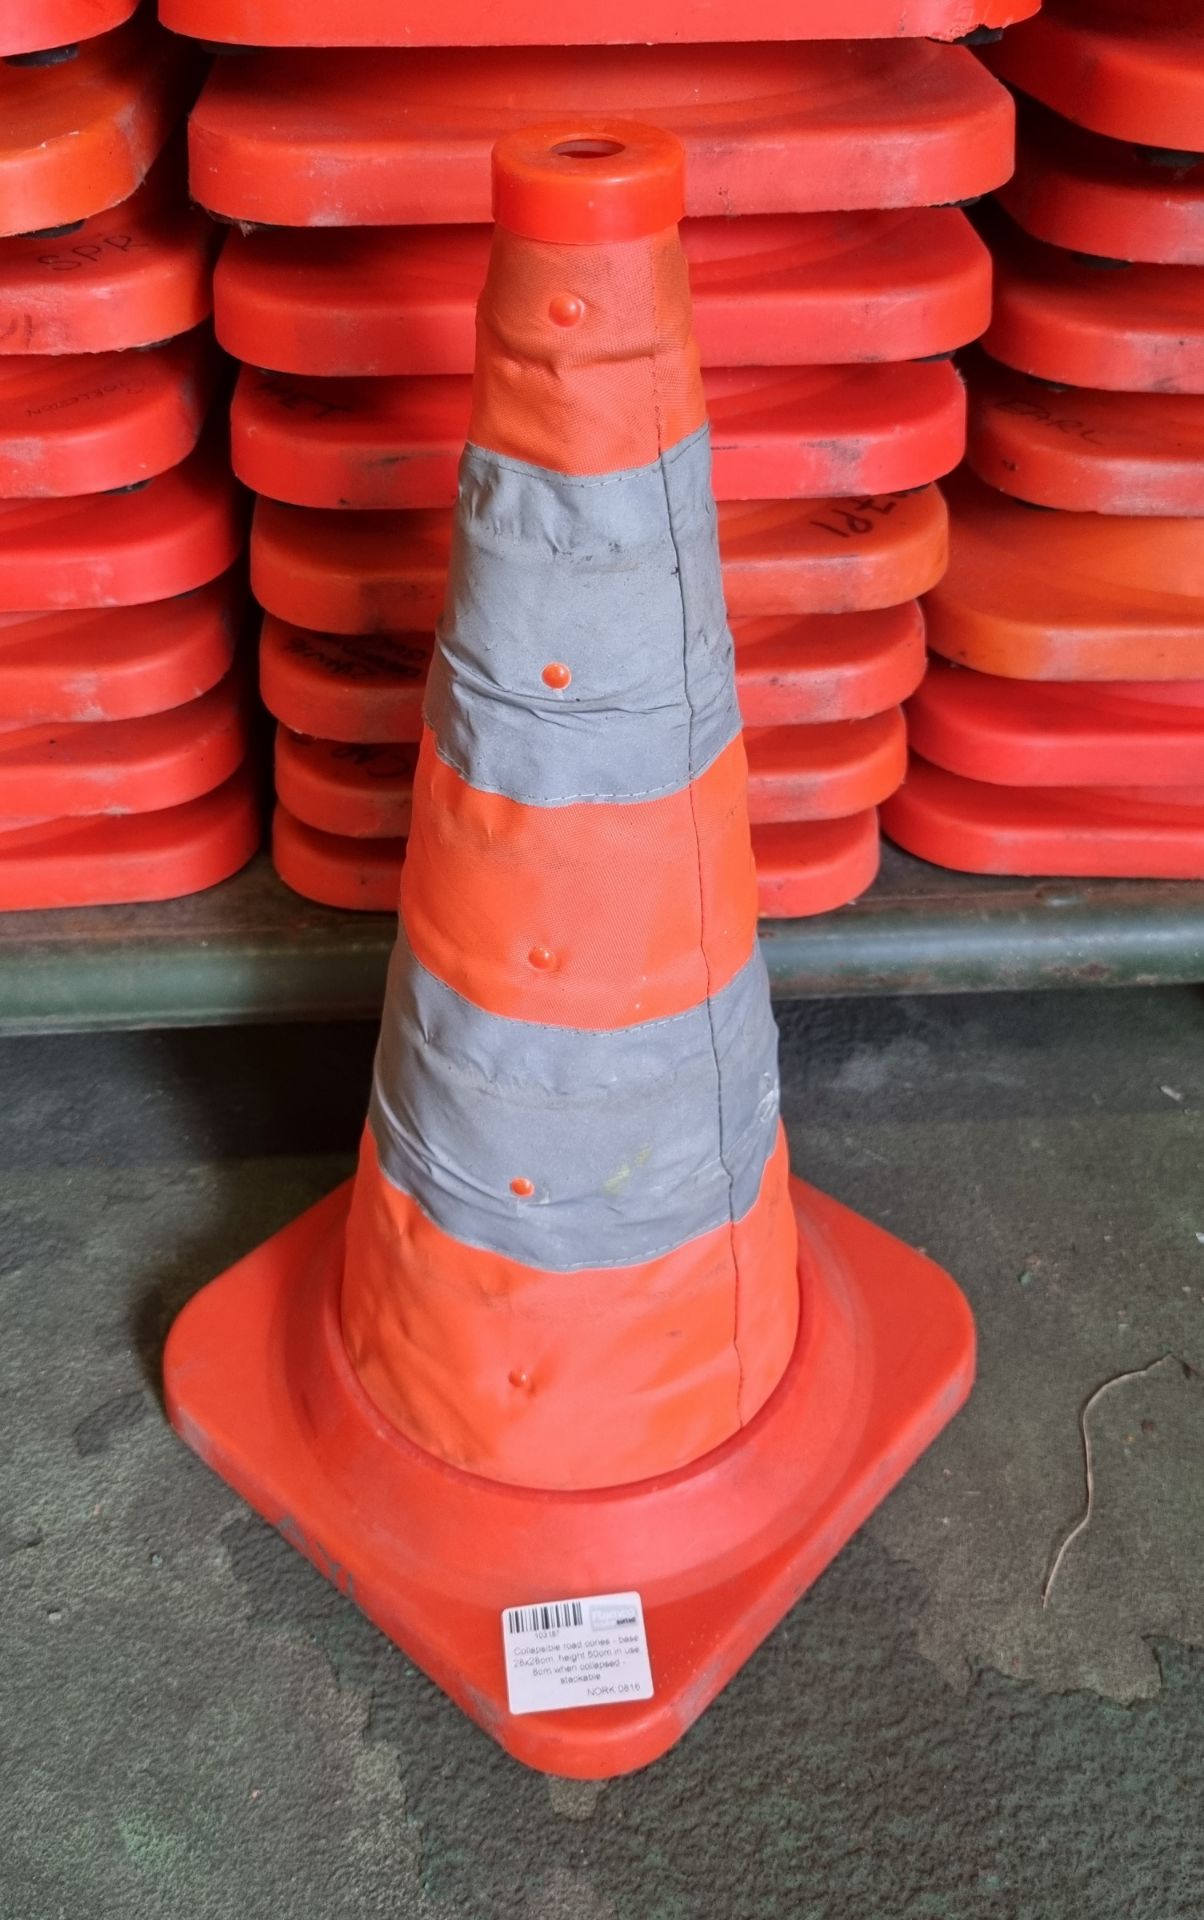 256x Collapsible road cones - base 28x28cm, height 50cm in use, 8cm when collapsed - stackable - Image 2 of 3